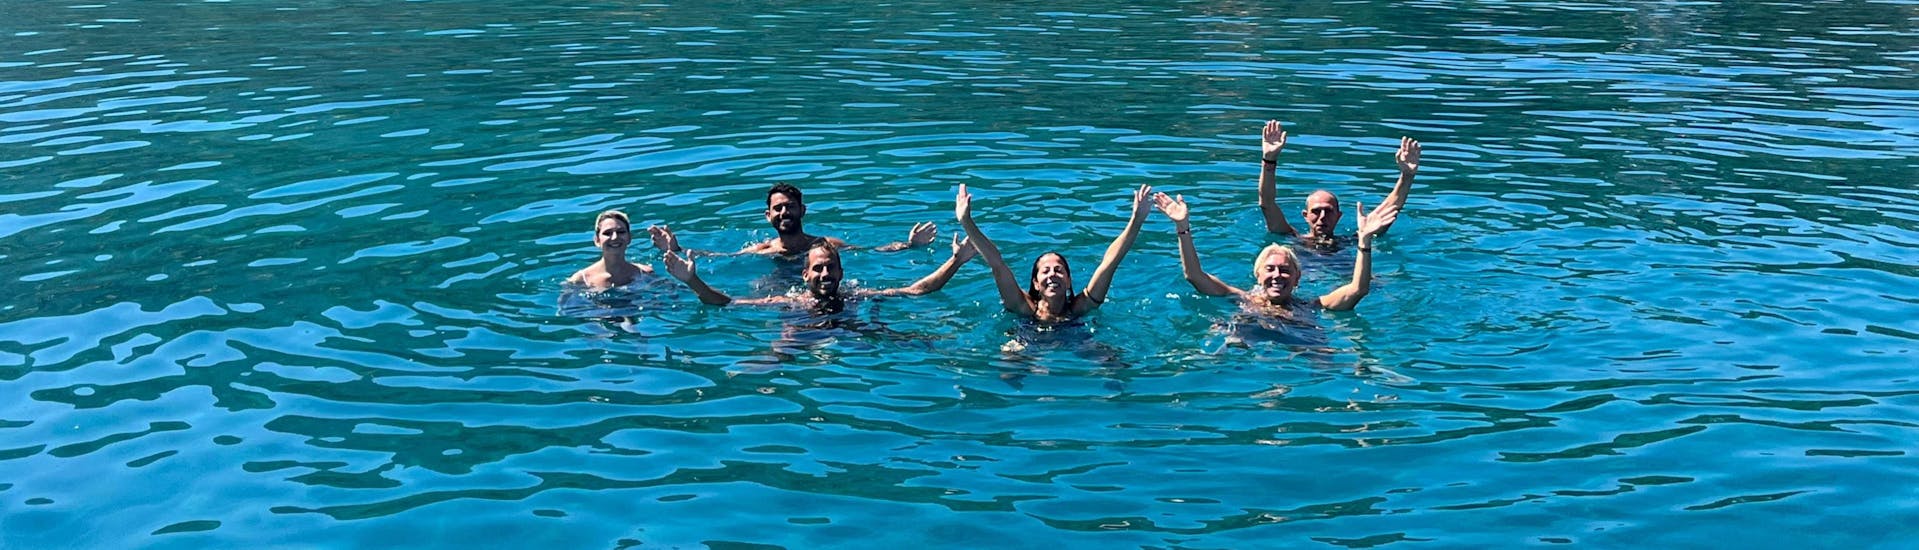 A group of people in the sea during a tour with Trip on Boat Cefalù.